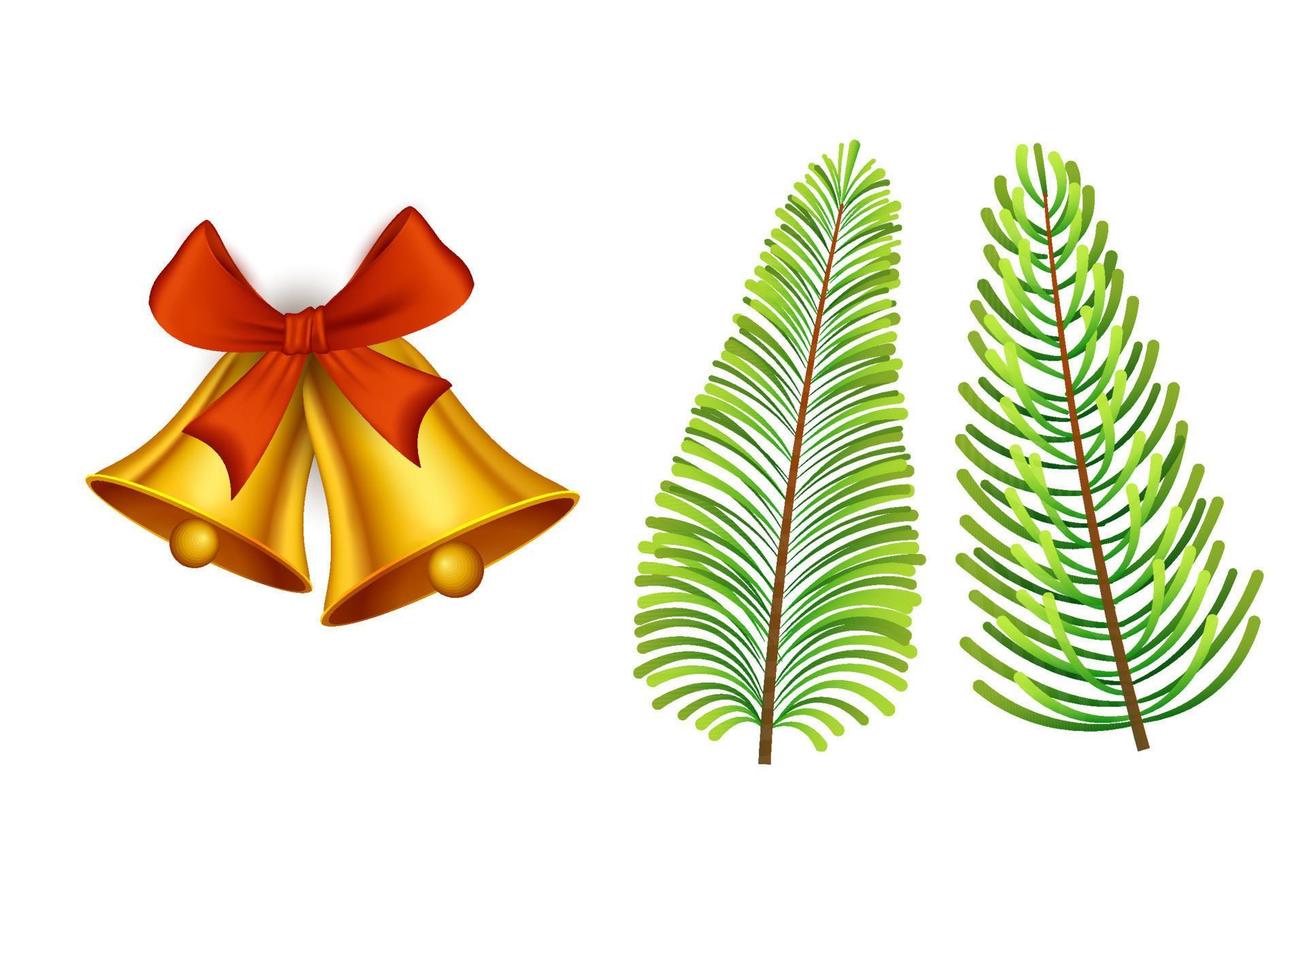 Golden Jingle Bells With Fir Leaves On White Background. vector